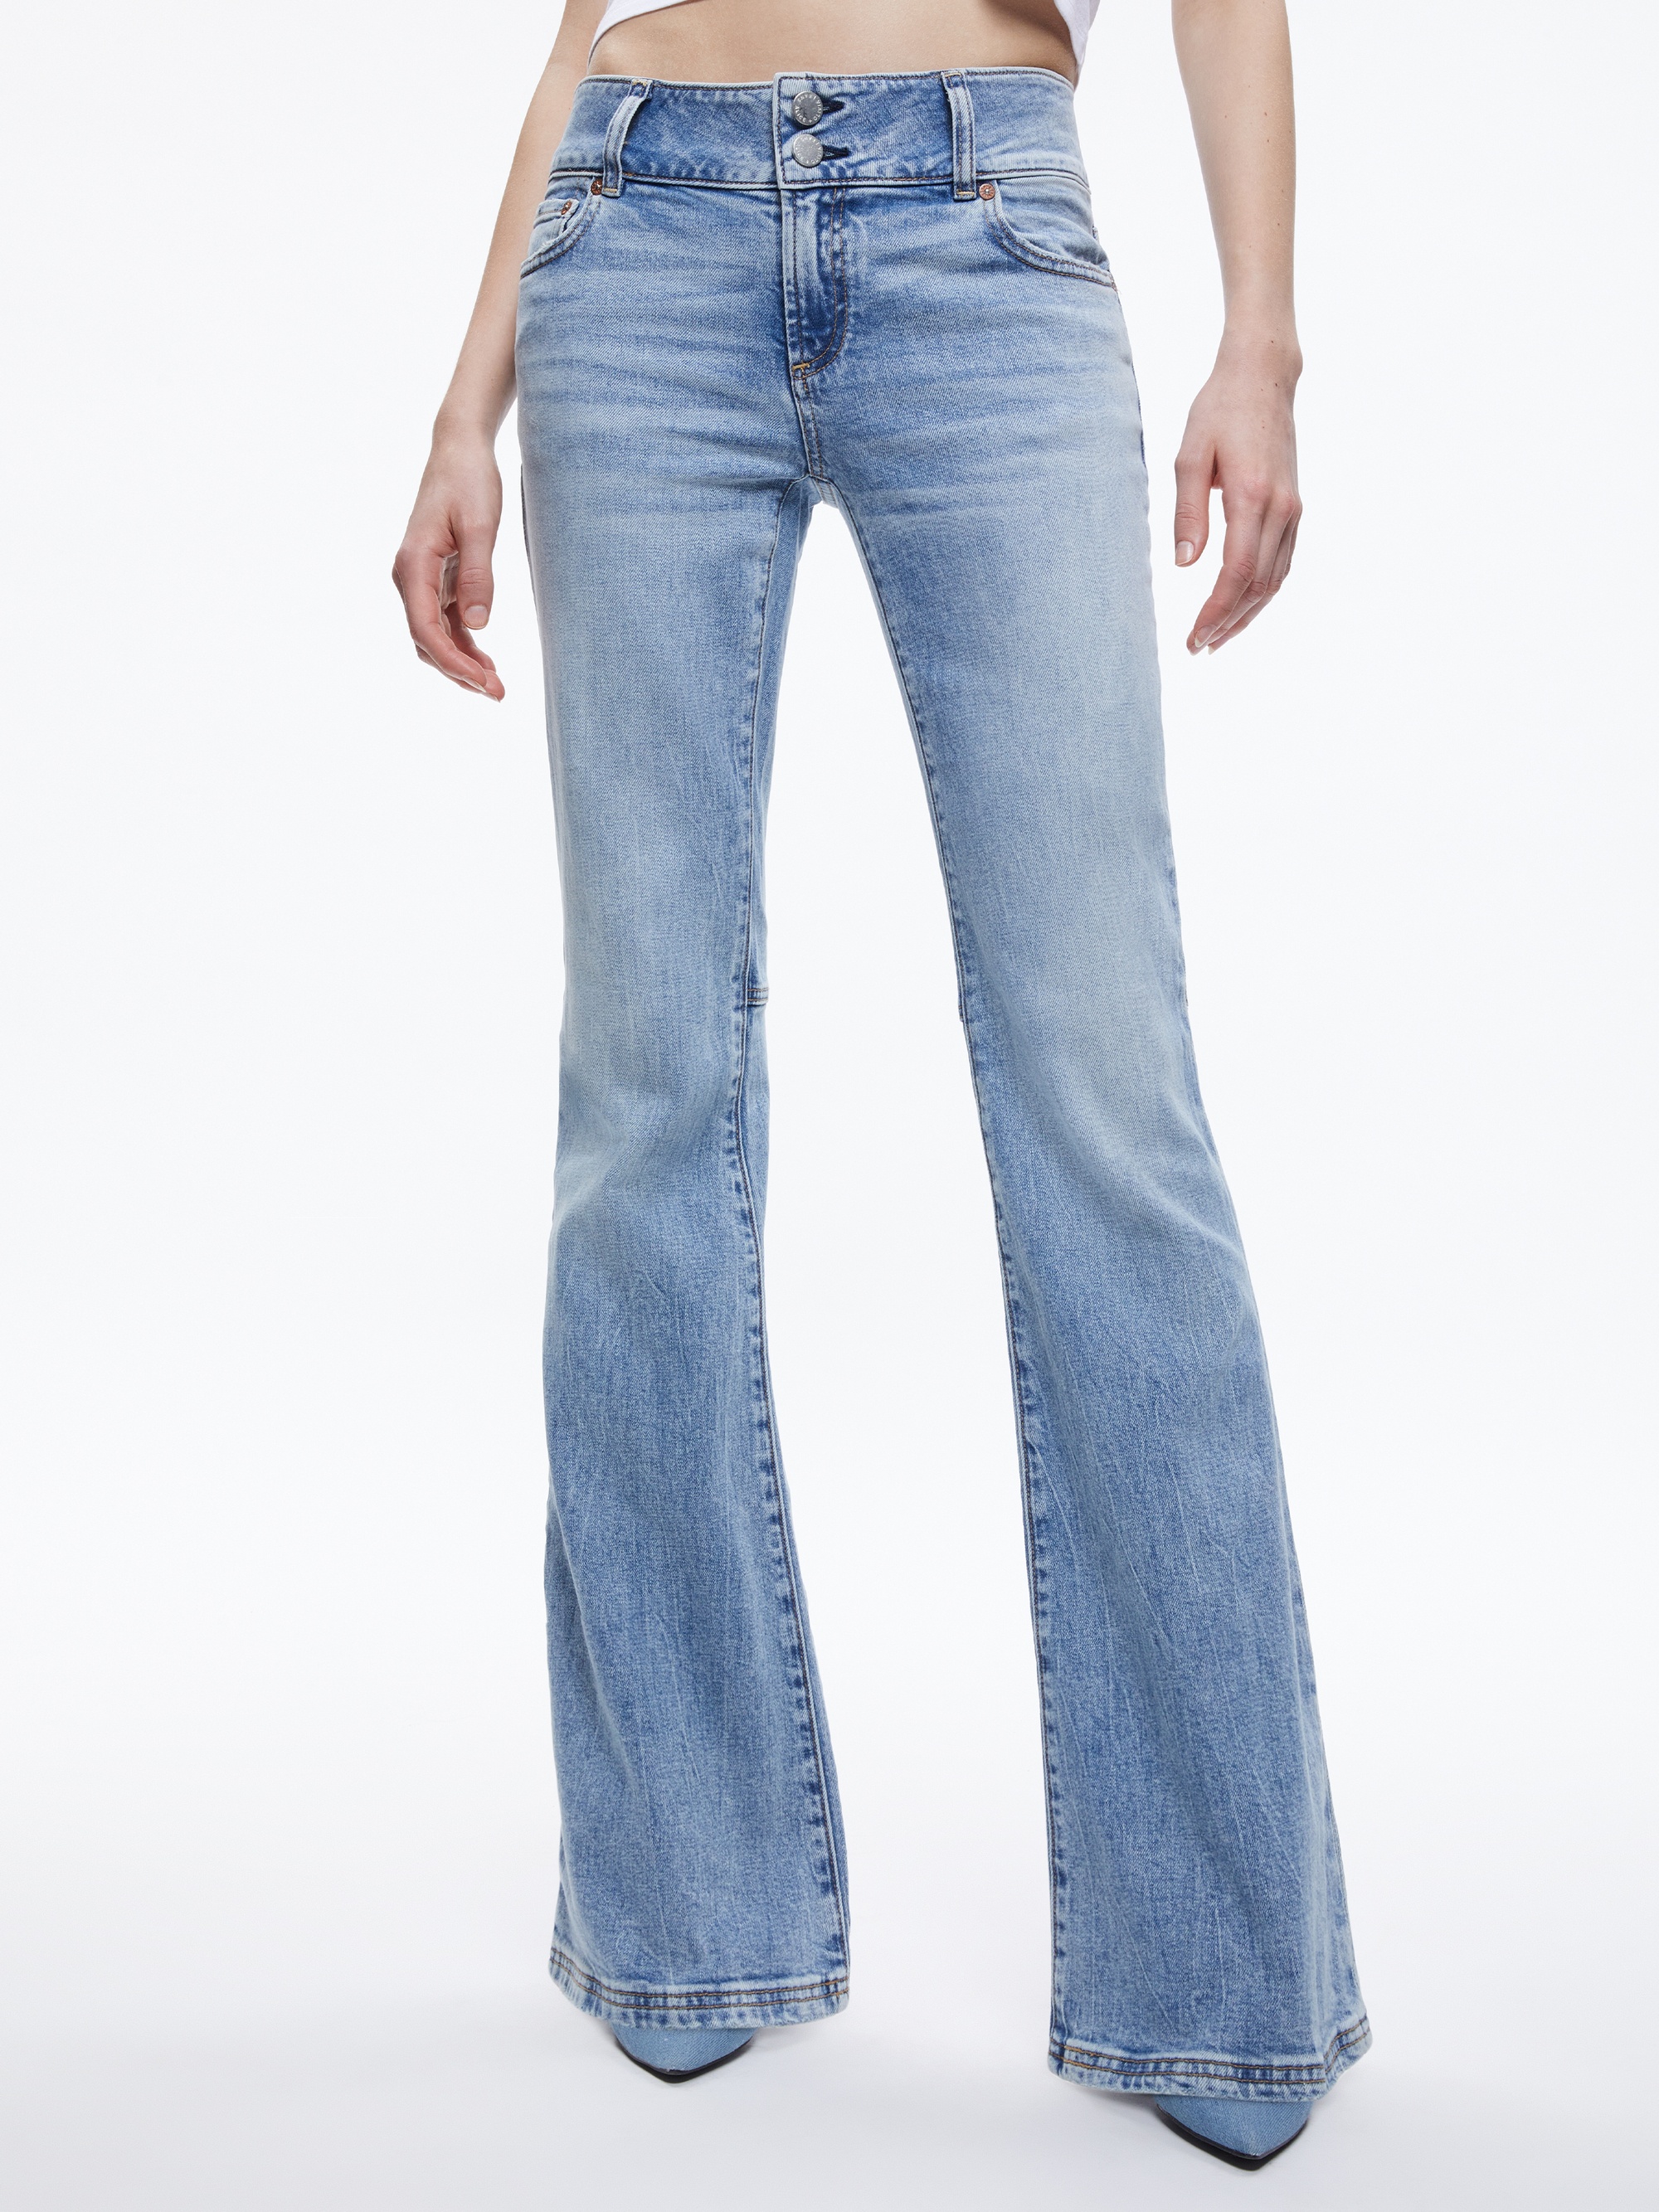 STACEY LOW RISE BELL BOTTOM JEAN - 5